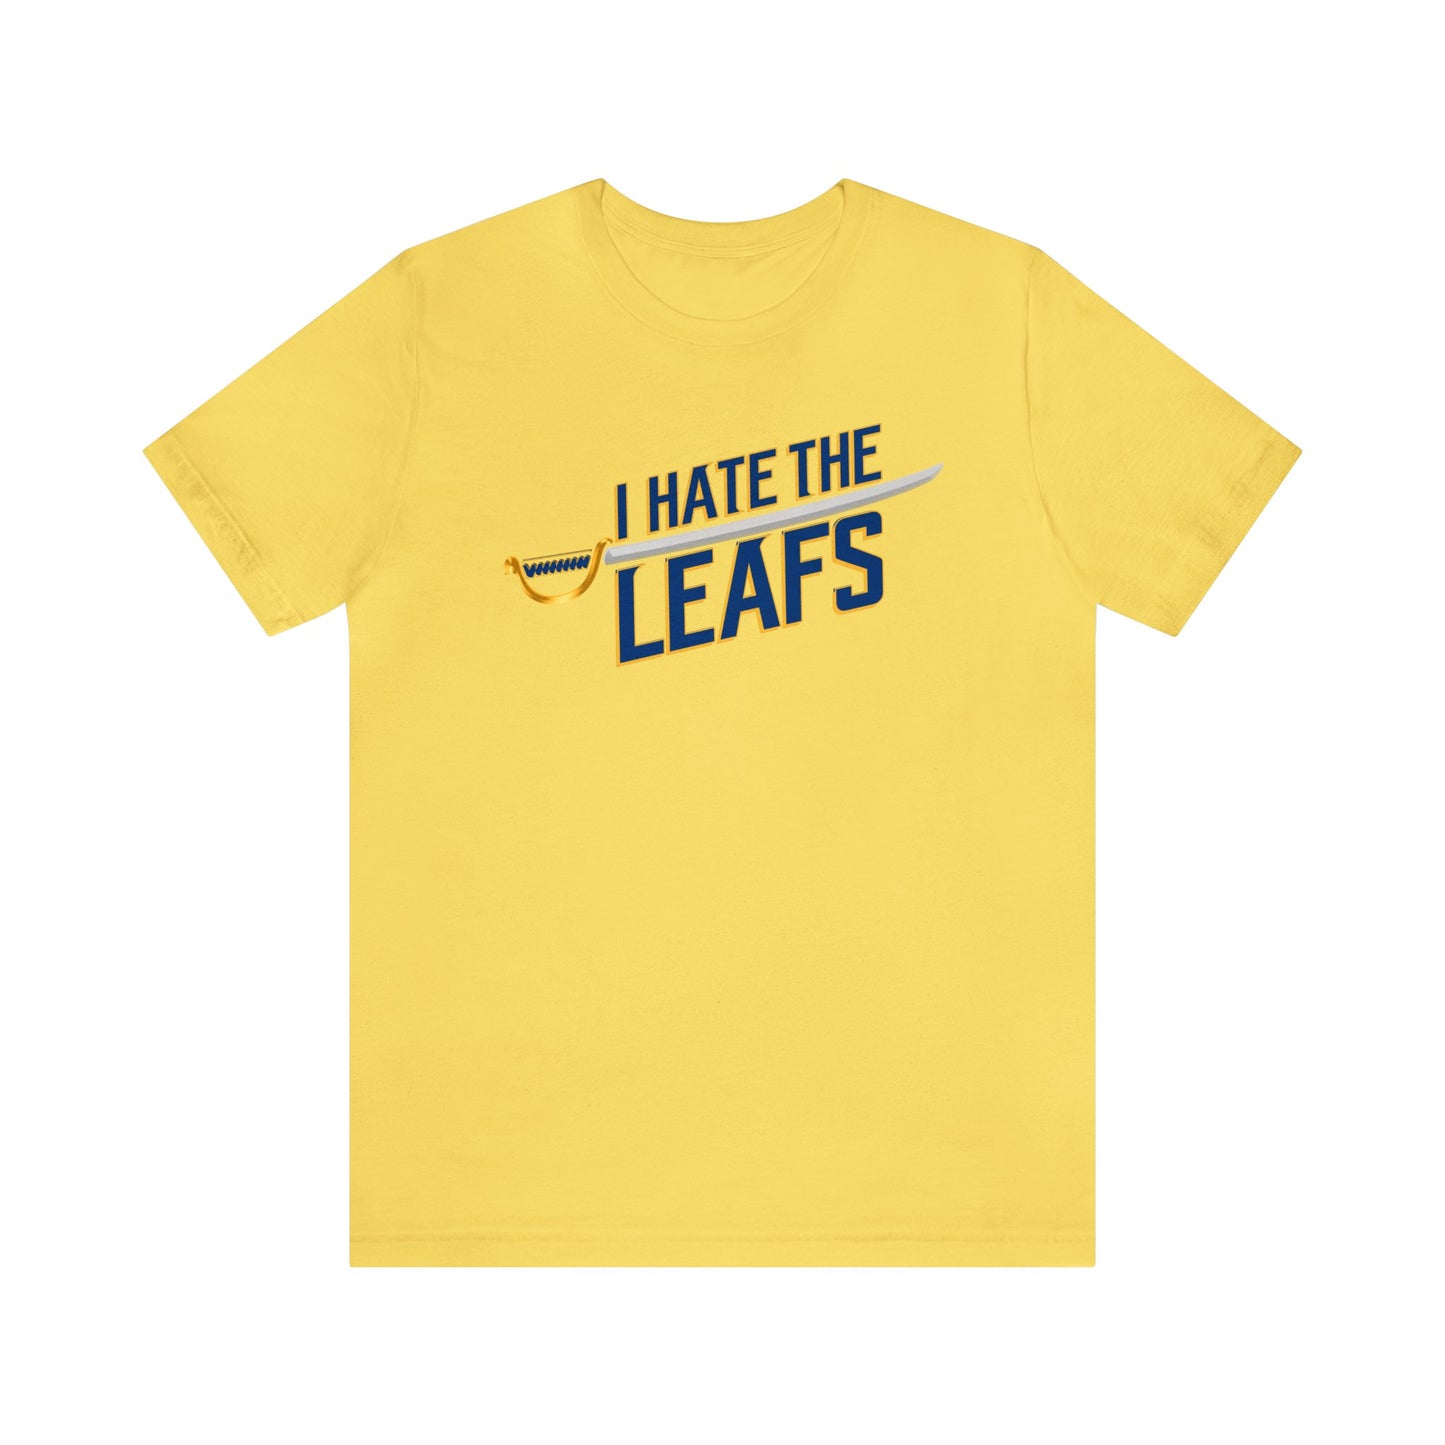 I Hate That Leaves Team (for Buffalo fans) - Unisex Jersey Short Sleeve Tee